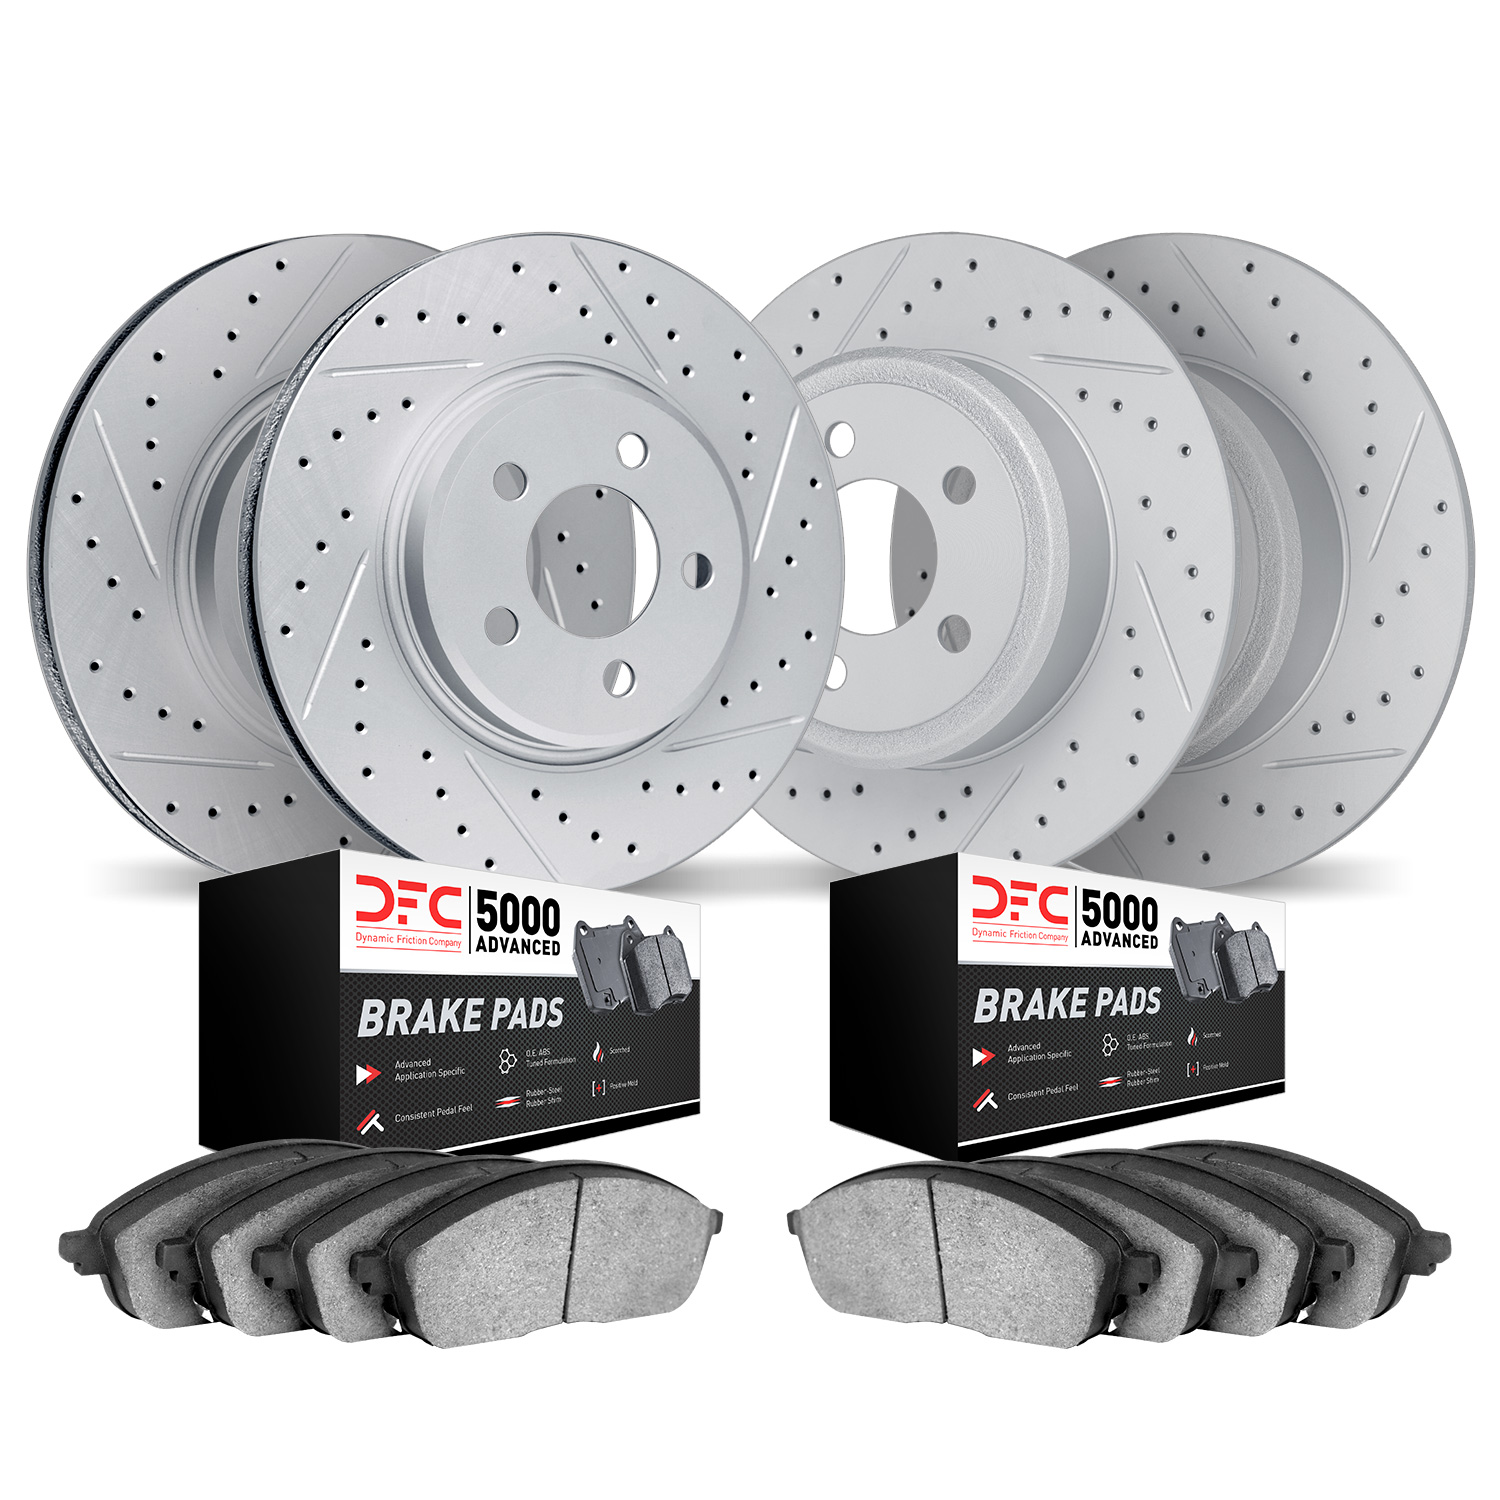 2504-54303 Geoperformance Drilled/Slotted Rotors w/5000 Advanced Brake Pads Kit, 2015-2019 Ford/Lincoln/Mercury/Mazda, Position: